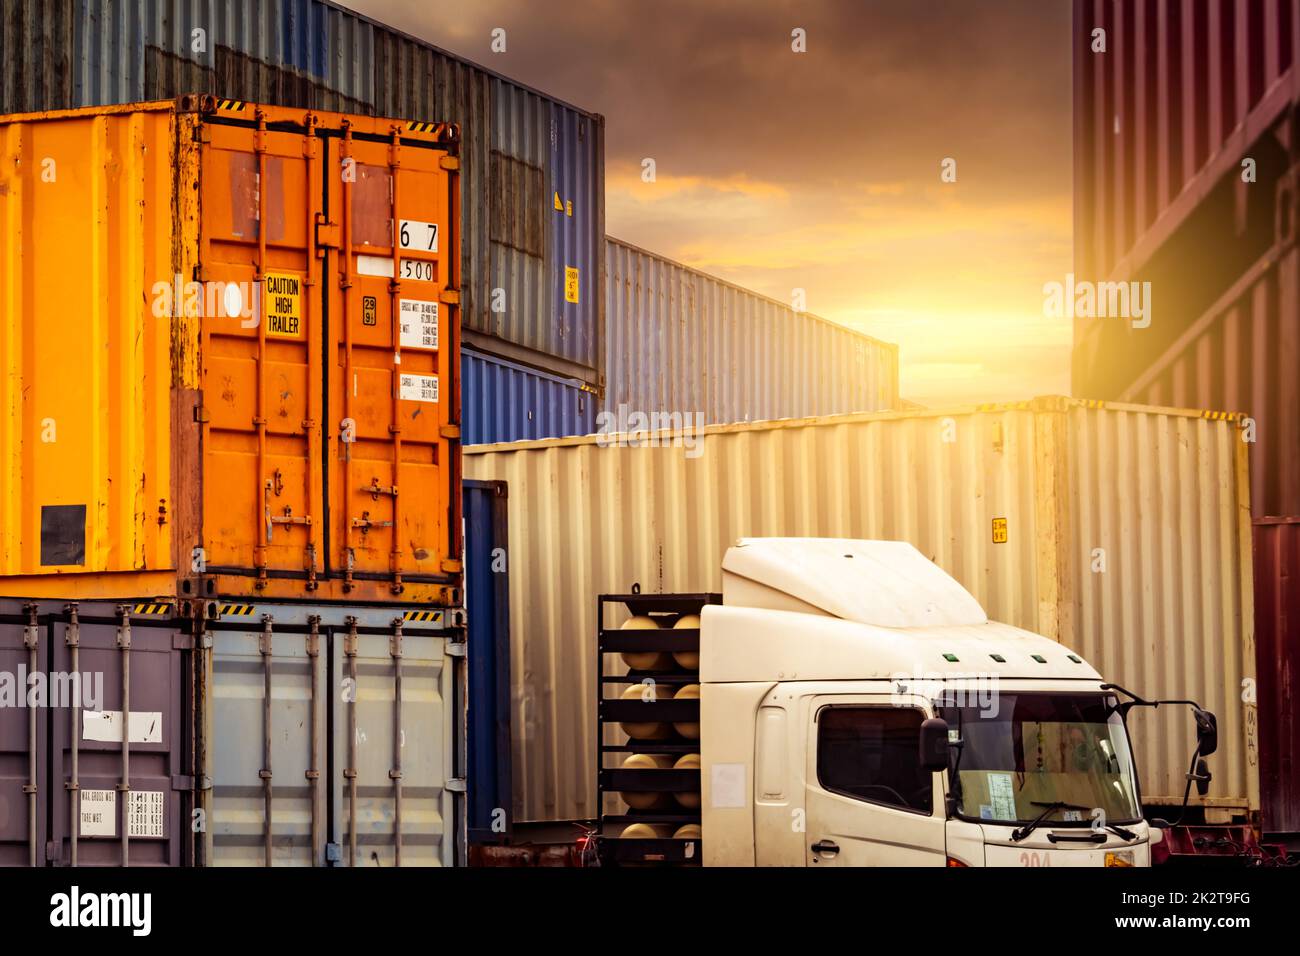 Logistic container with trailer truck. Cargo and shipping business. Container for truck transport. Container ship for import and export logistics. Logistic industry. Supply chain. Container freight. Stock Photo